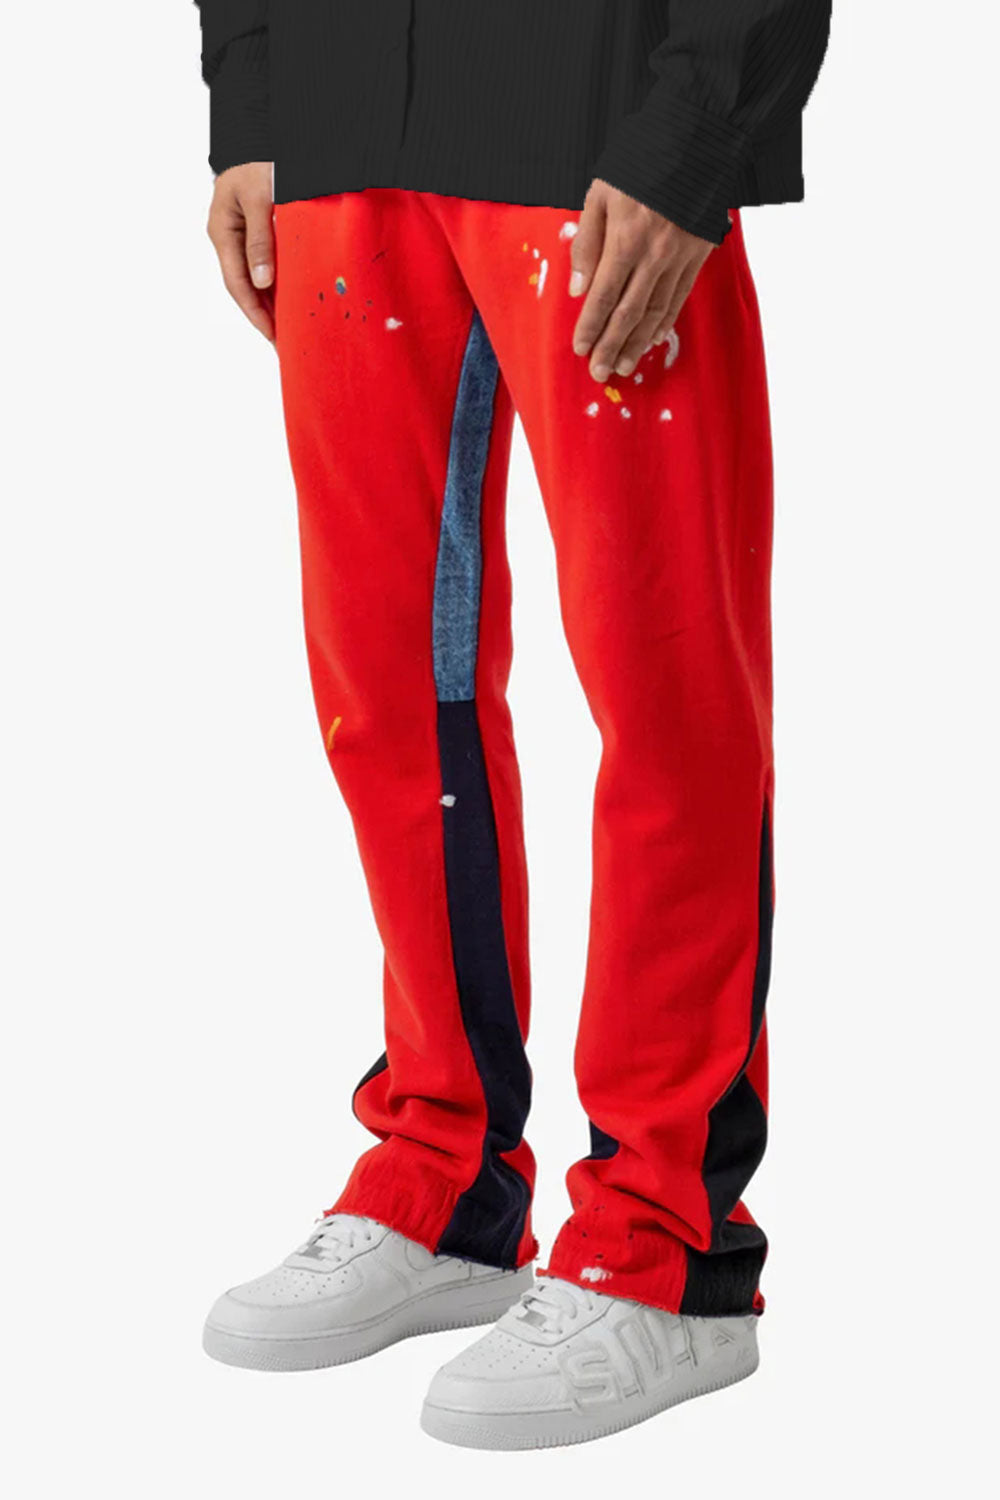 Gingtto Men's Red Flare Pants For Sale – GINGTTO